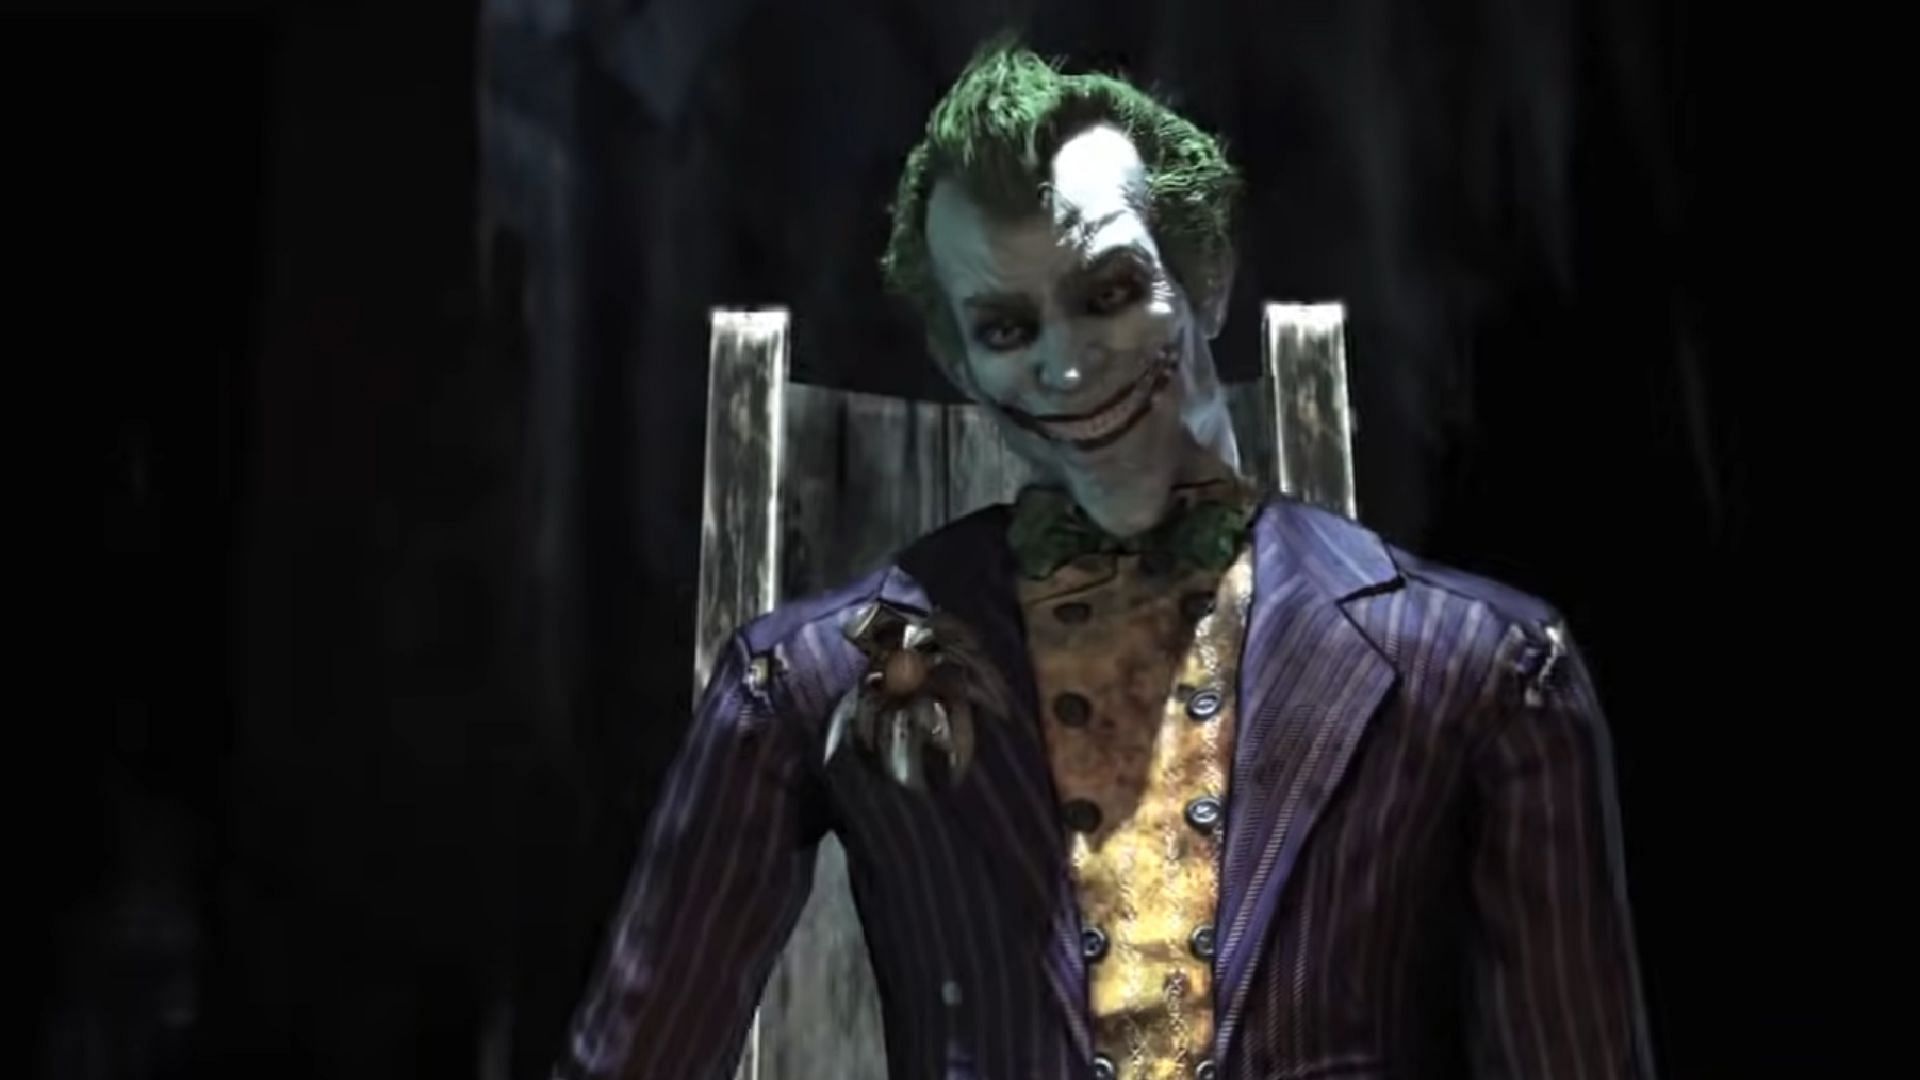 The Joker as he appears in the Arkham series (Image via Rocksteady/YouTube)